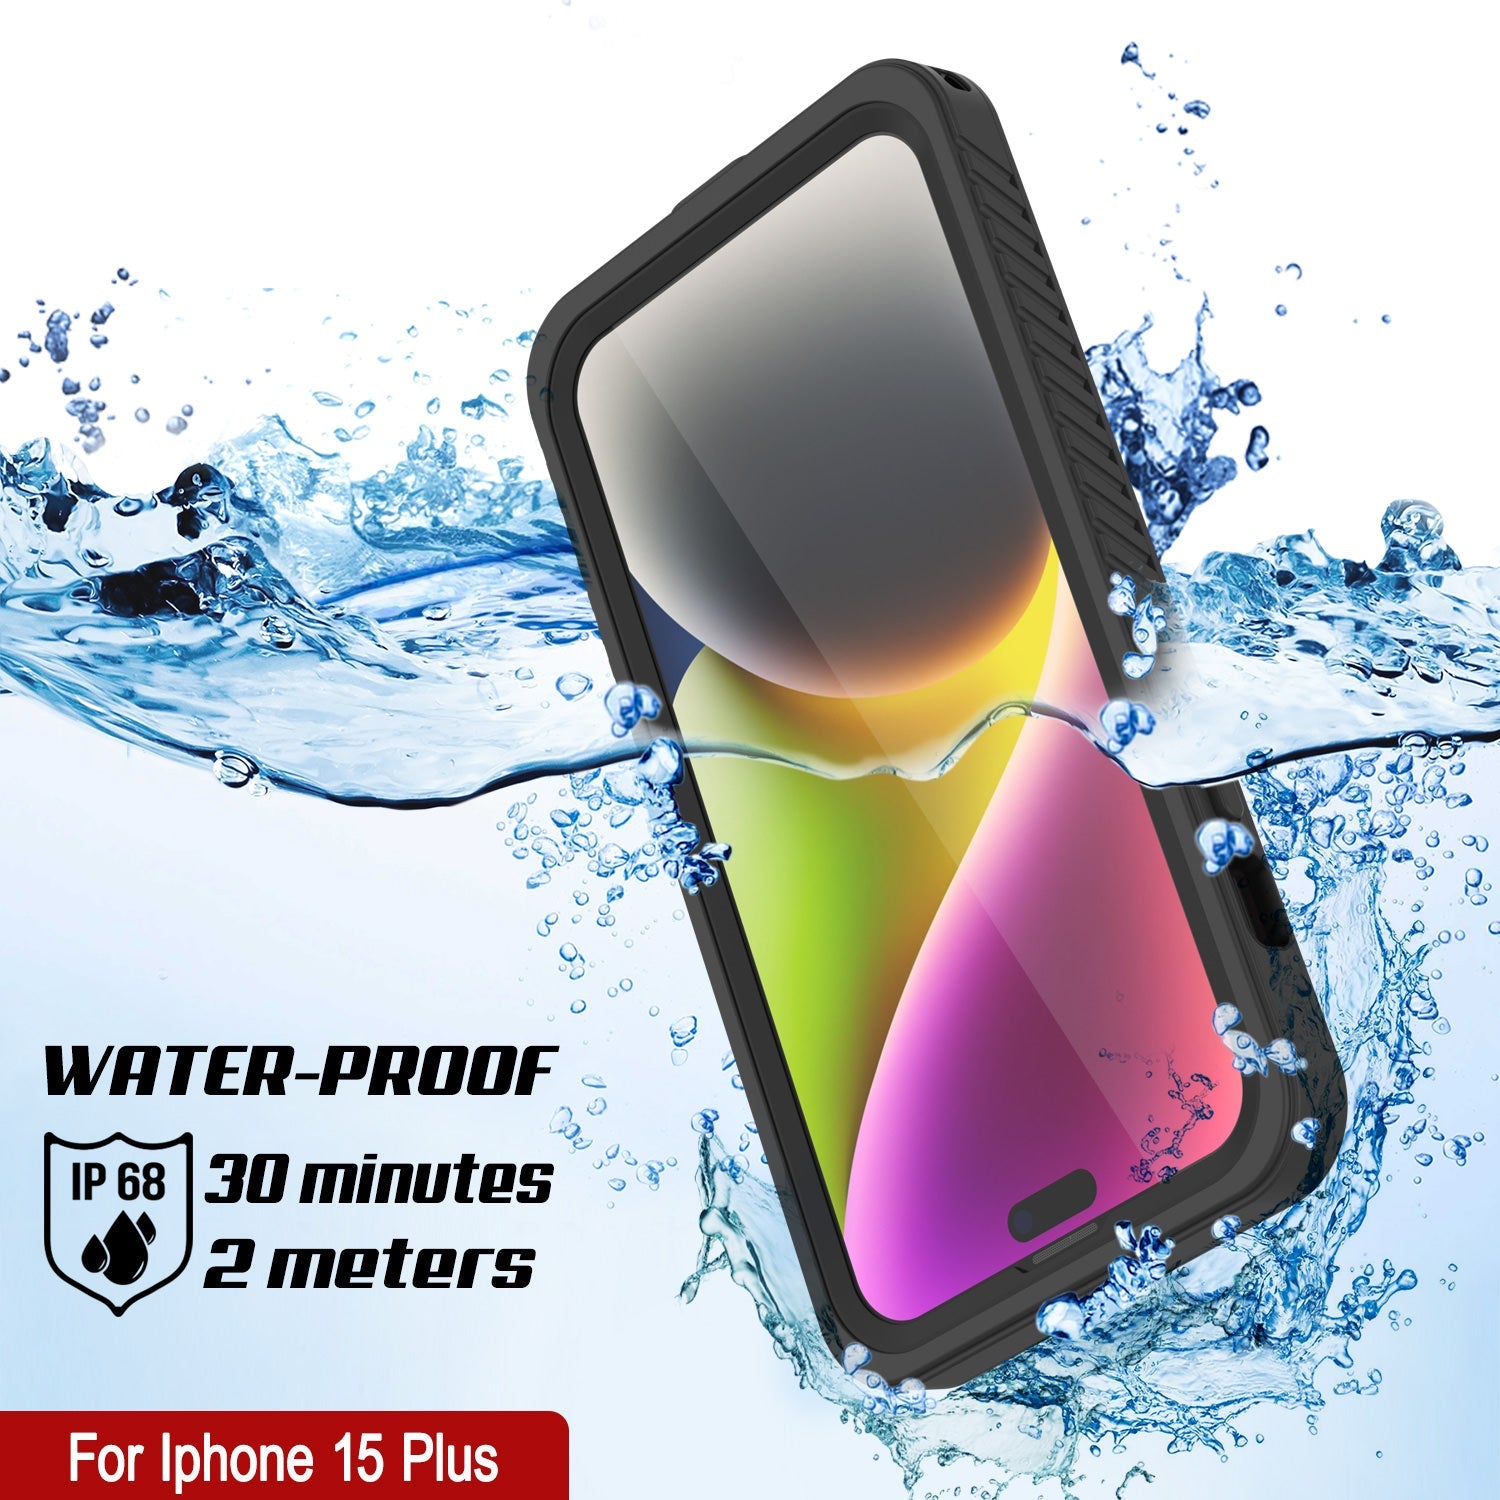 iPhone 15 Plus Waterproof Case, Punkcase [Extreme Series] Armor Cover W/ Built In Screen Protector [Black]